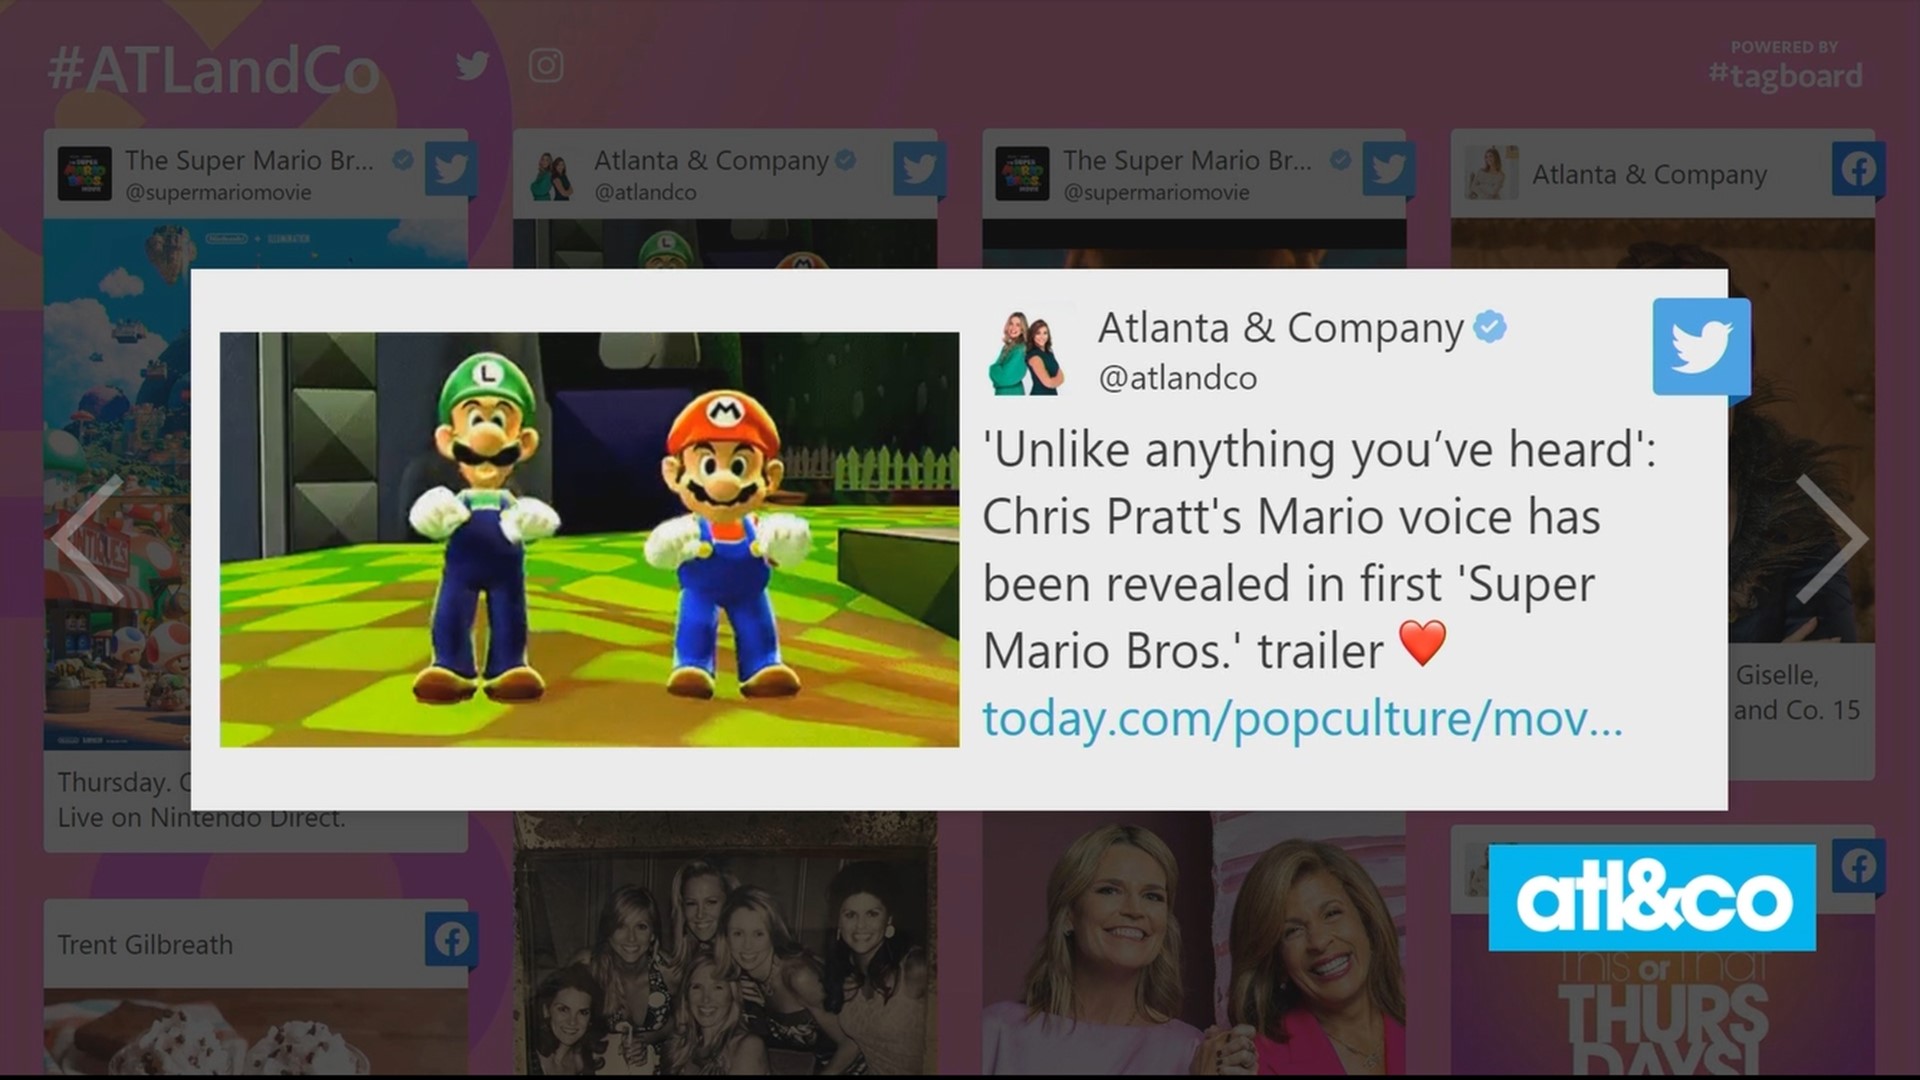 Check out the first teaser trailer for animated feature 'Super Mario Bros.' with Chris Pratt.